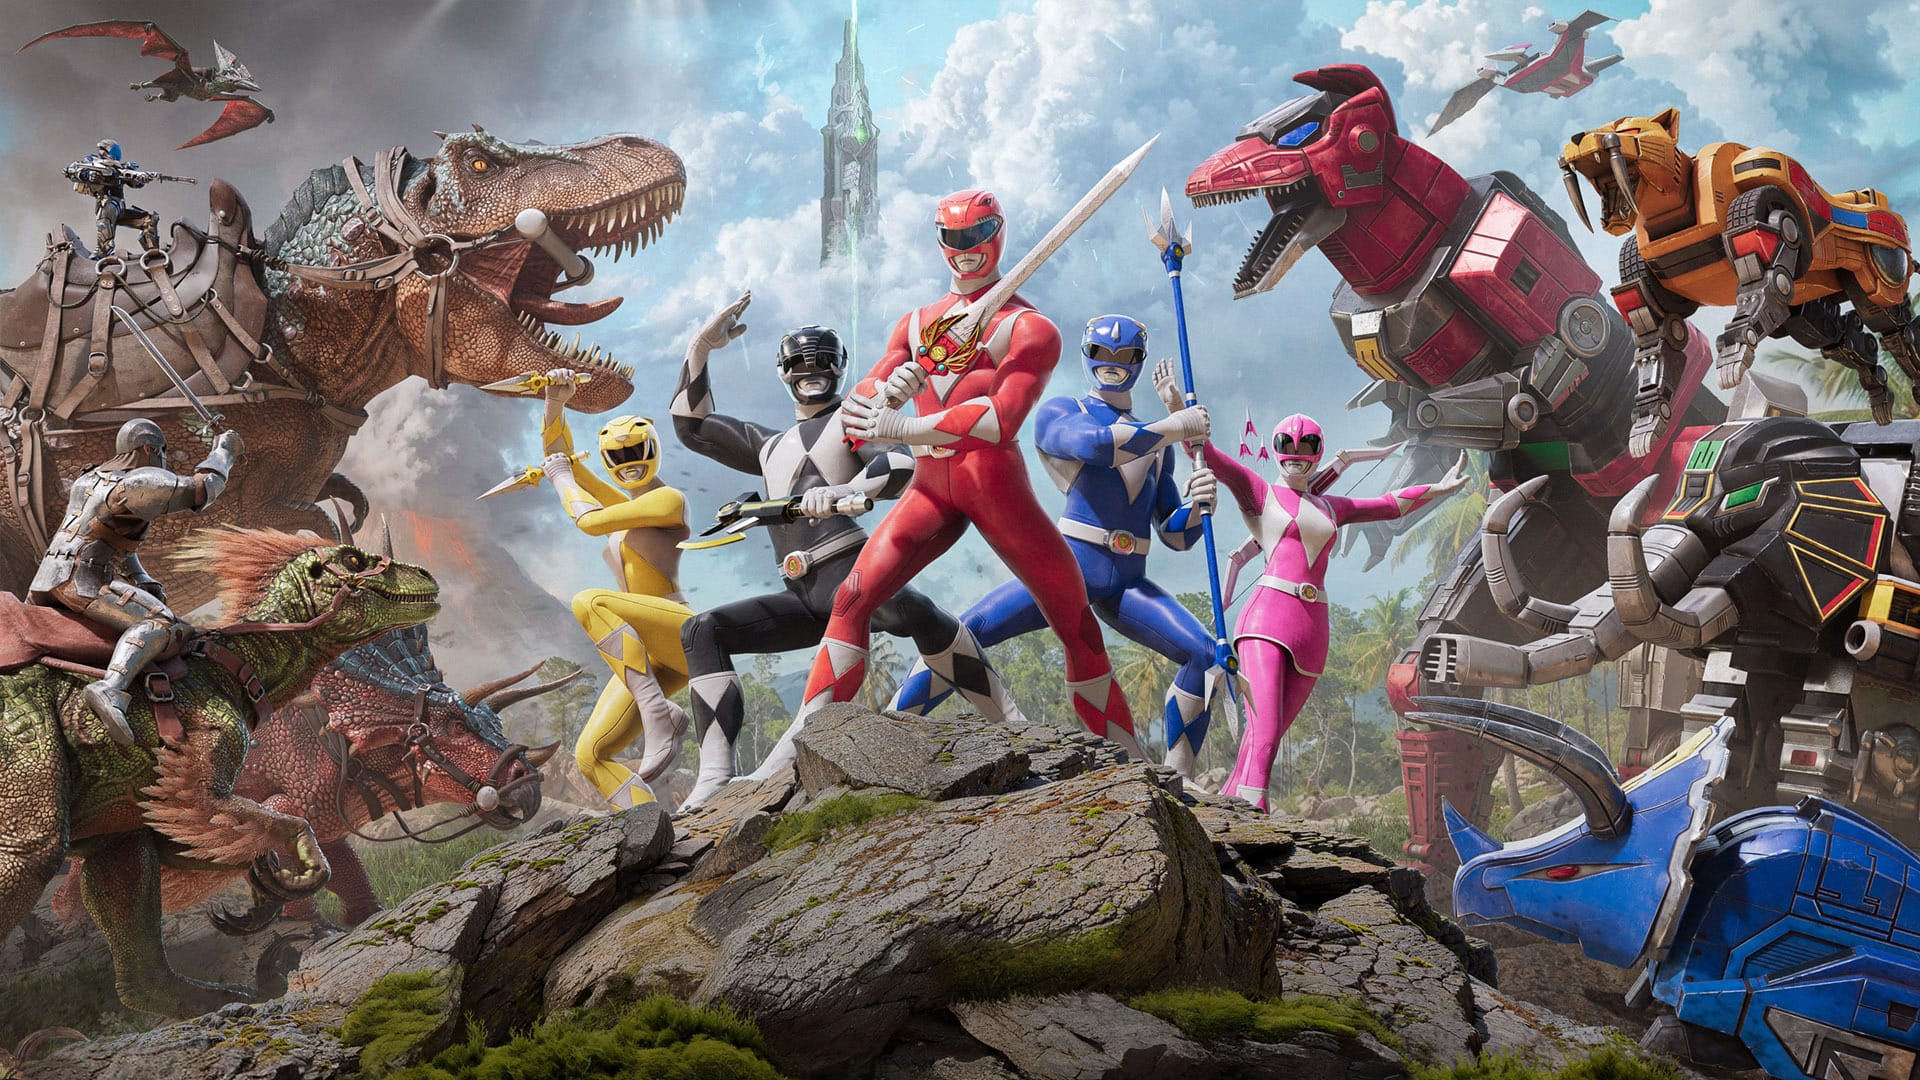 CurseForge Collaborates with Hasbro to Bring Power Rangers to ARK: Survival Ascended